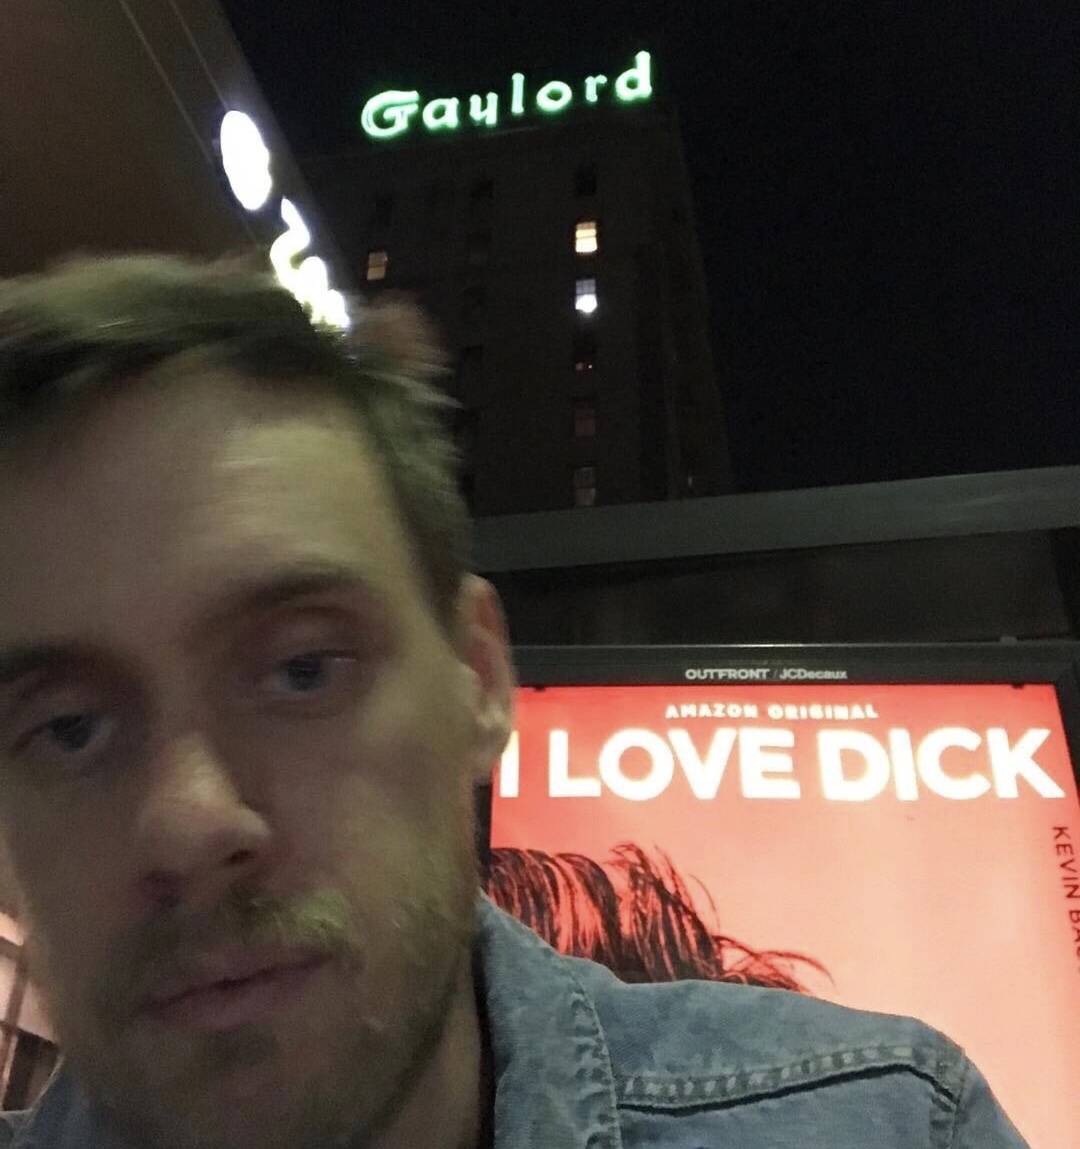 meme stream - gaylord i love dick - Gaylord Out Front JCDecaux Anazon Original I Love Dick Kevin Bat